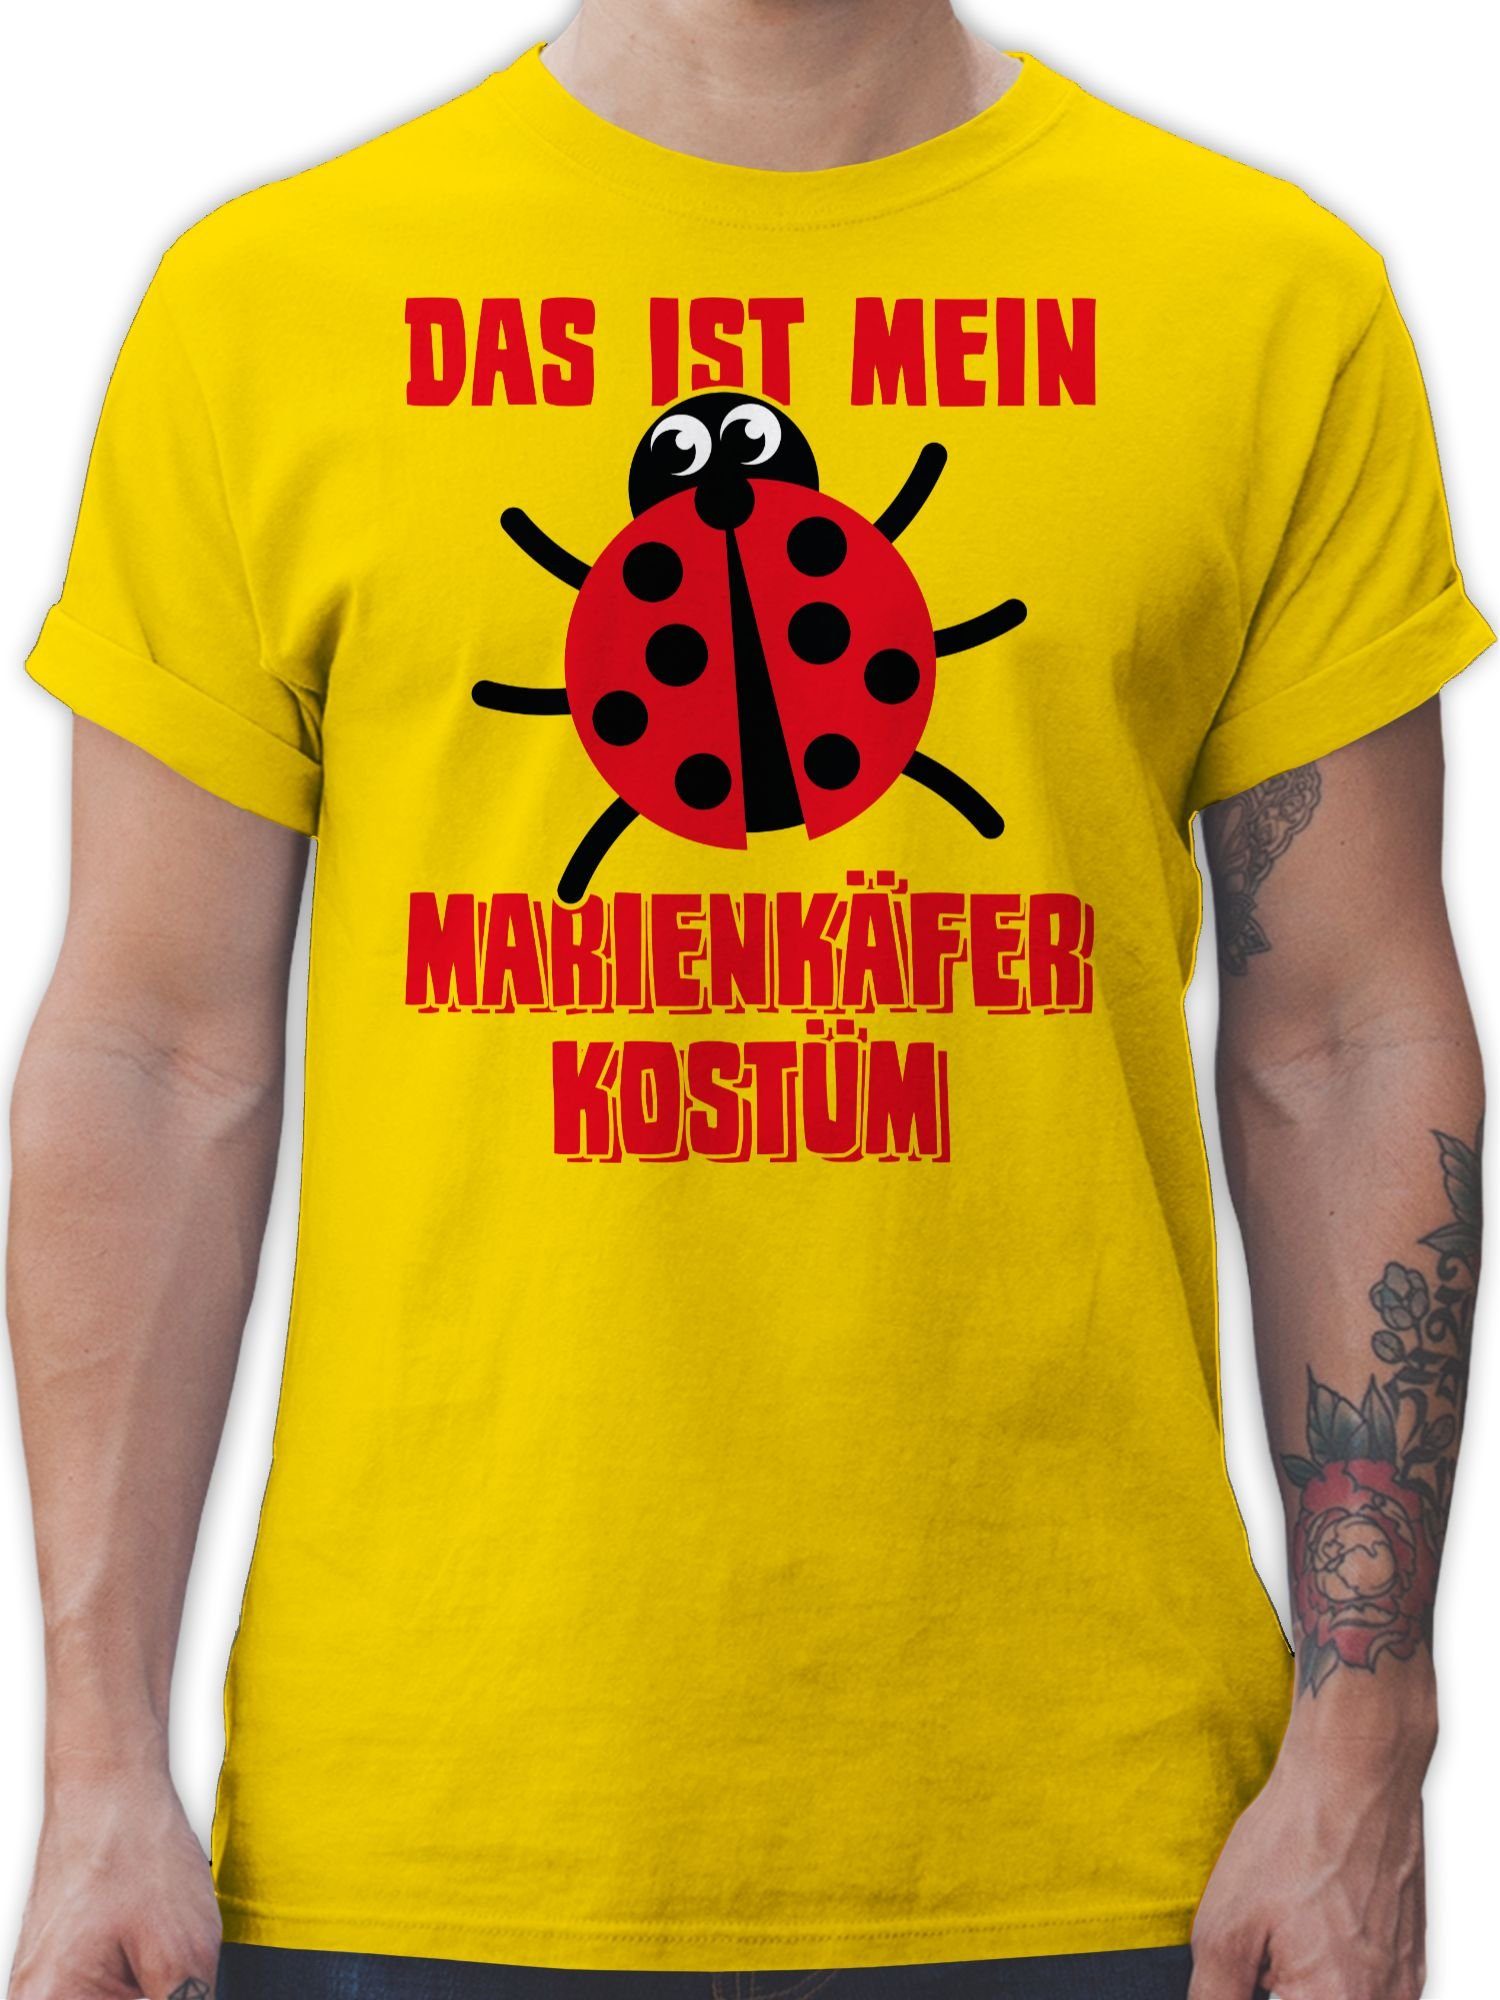 Shirtracer T-Shirt Das Outfit Marienkäferkostüm - Gelb mein Käfer Marienkäfer Marienkaefer Kostüm ist Karneval 2